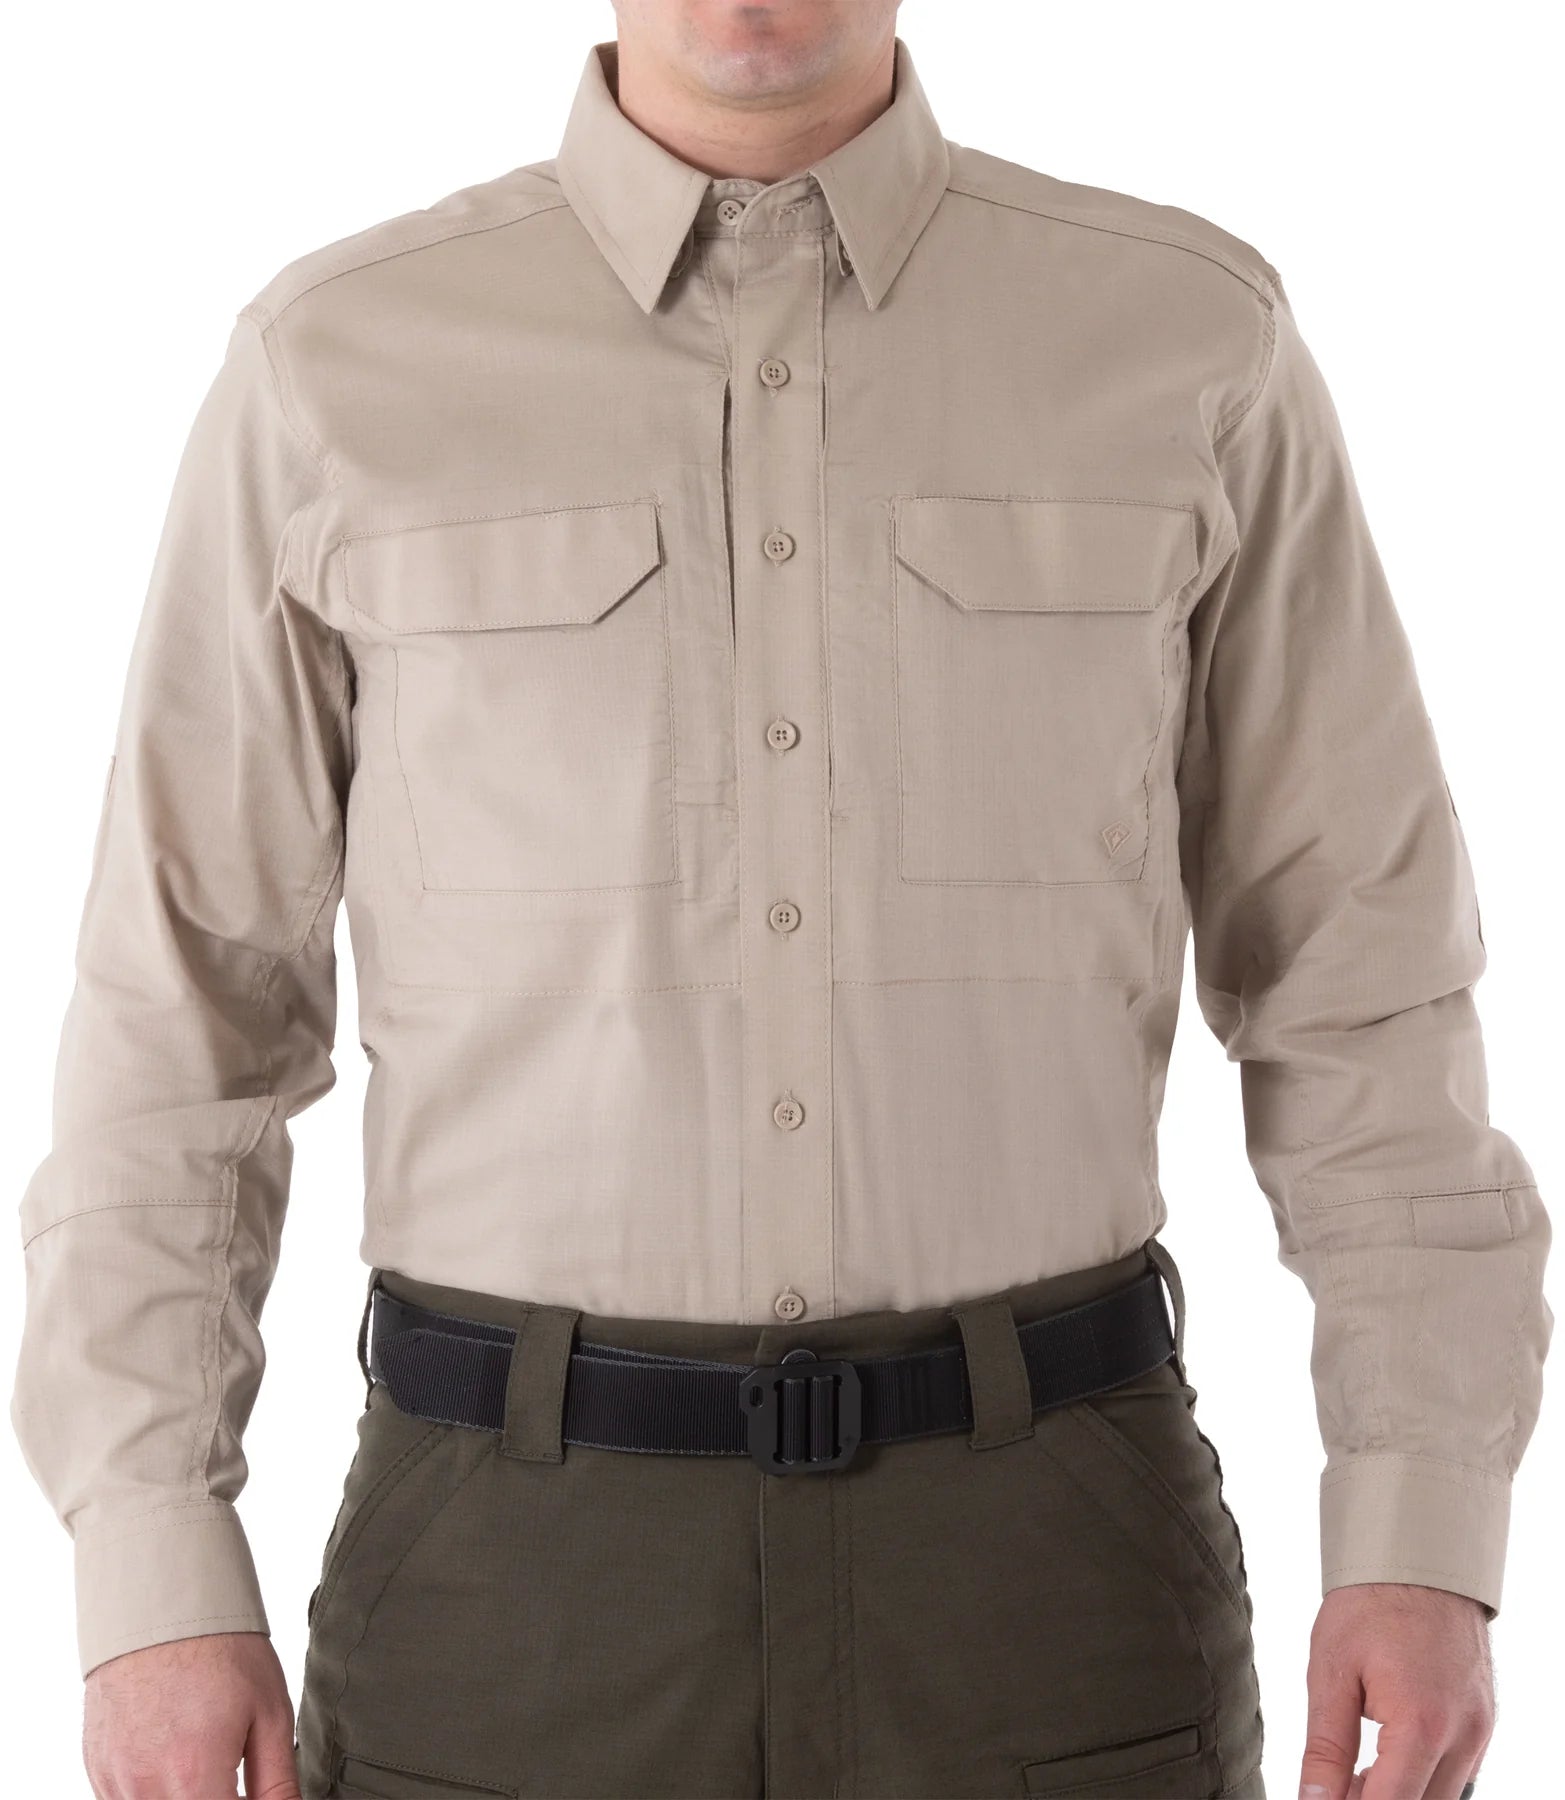 First Tactical - MEN'S V2 TACTICAL L/S SHIRT - TALL SIZES